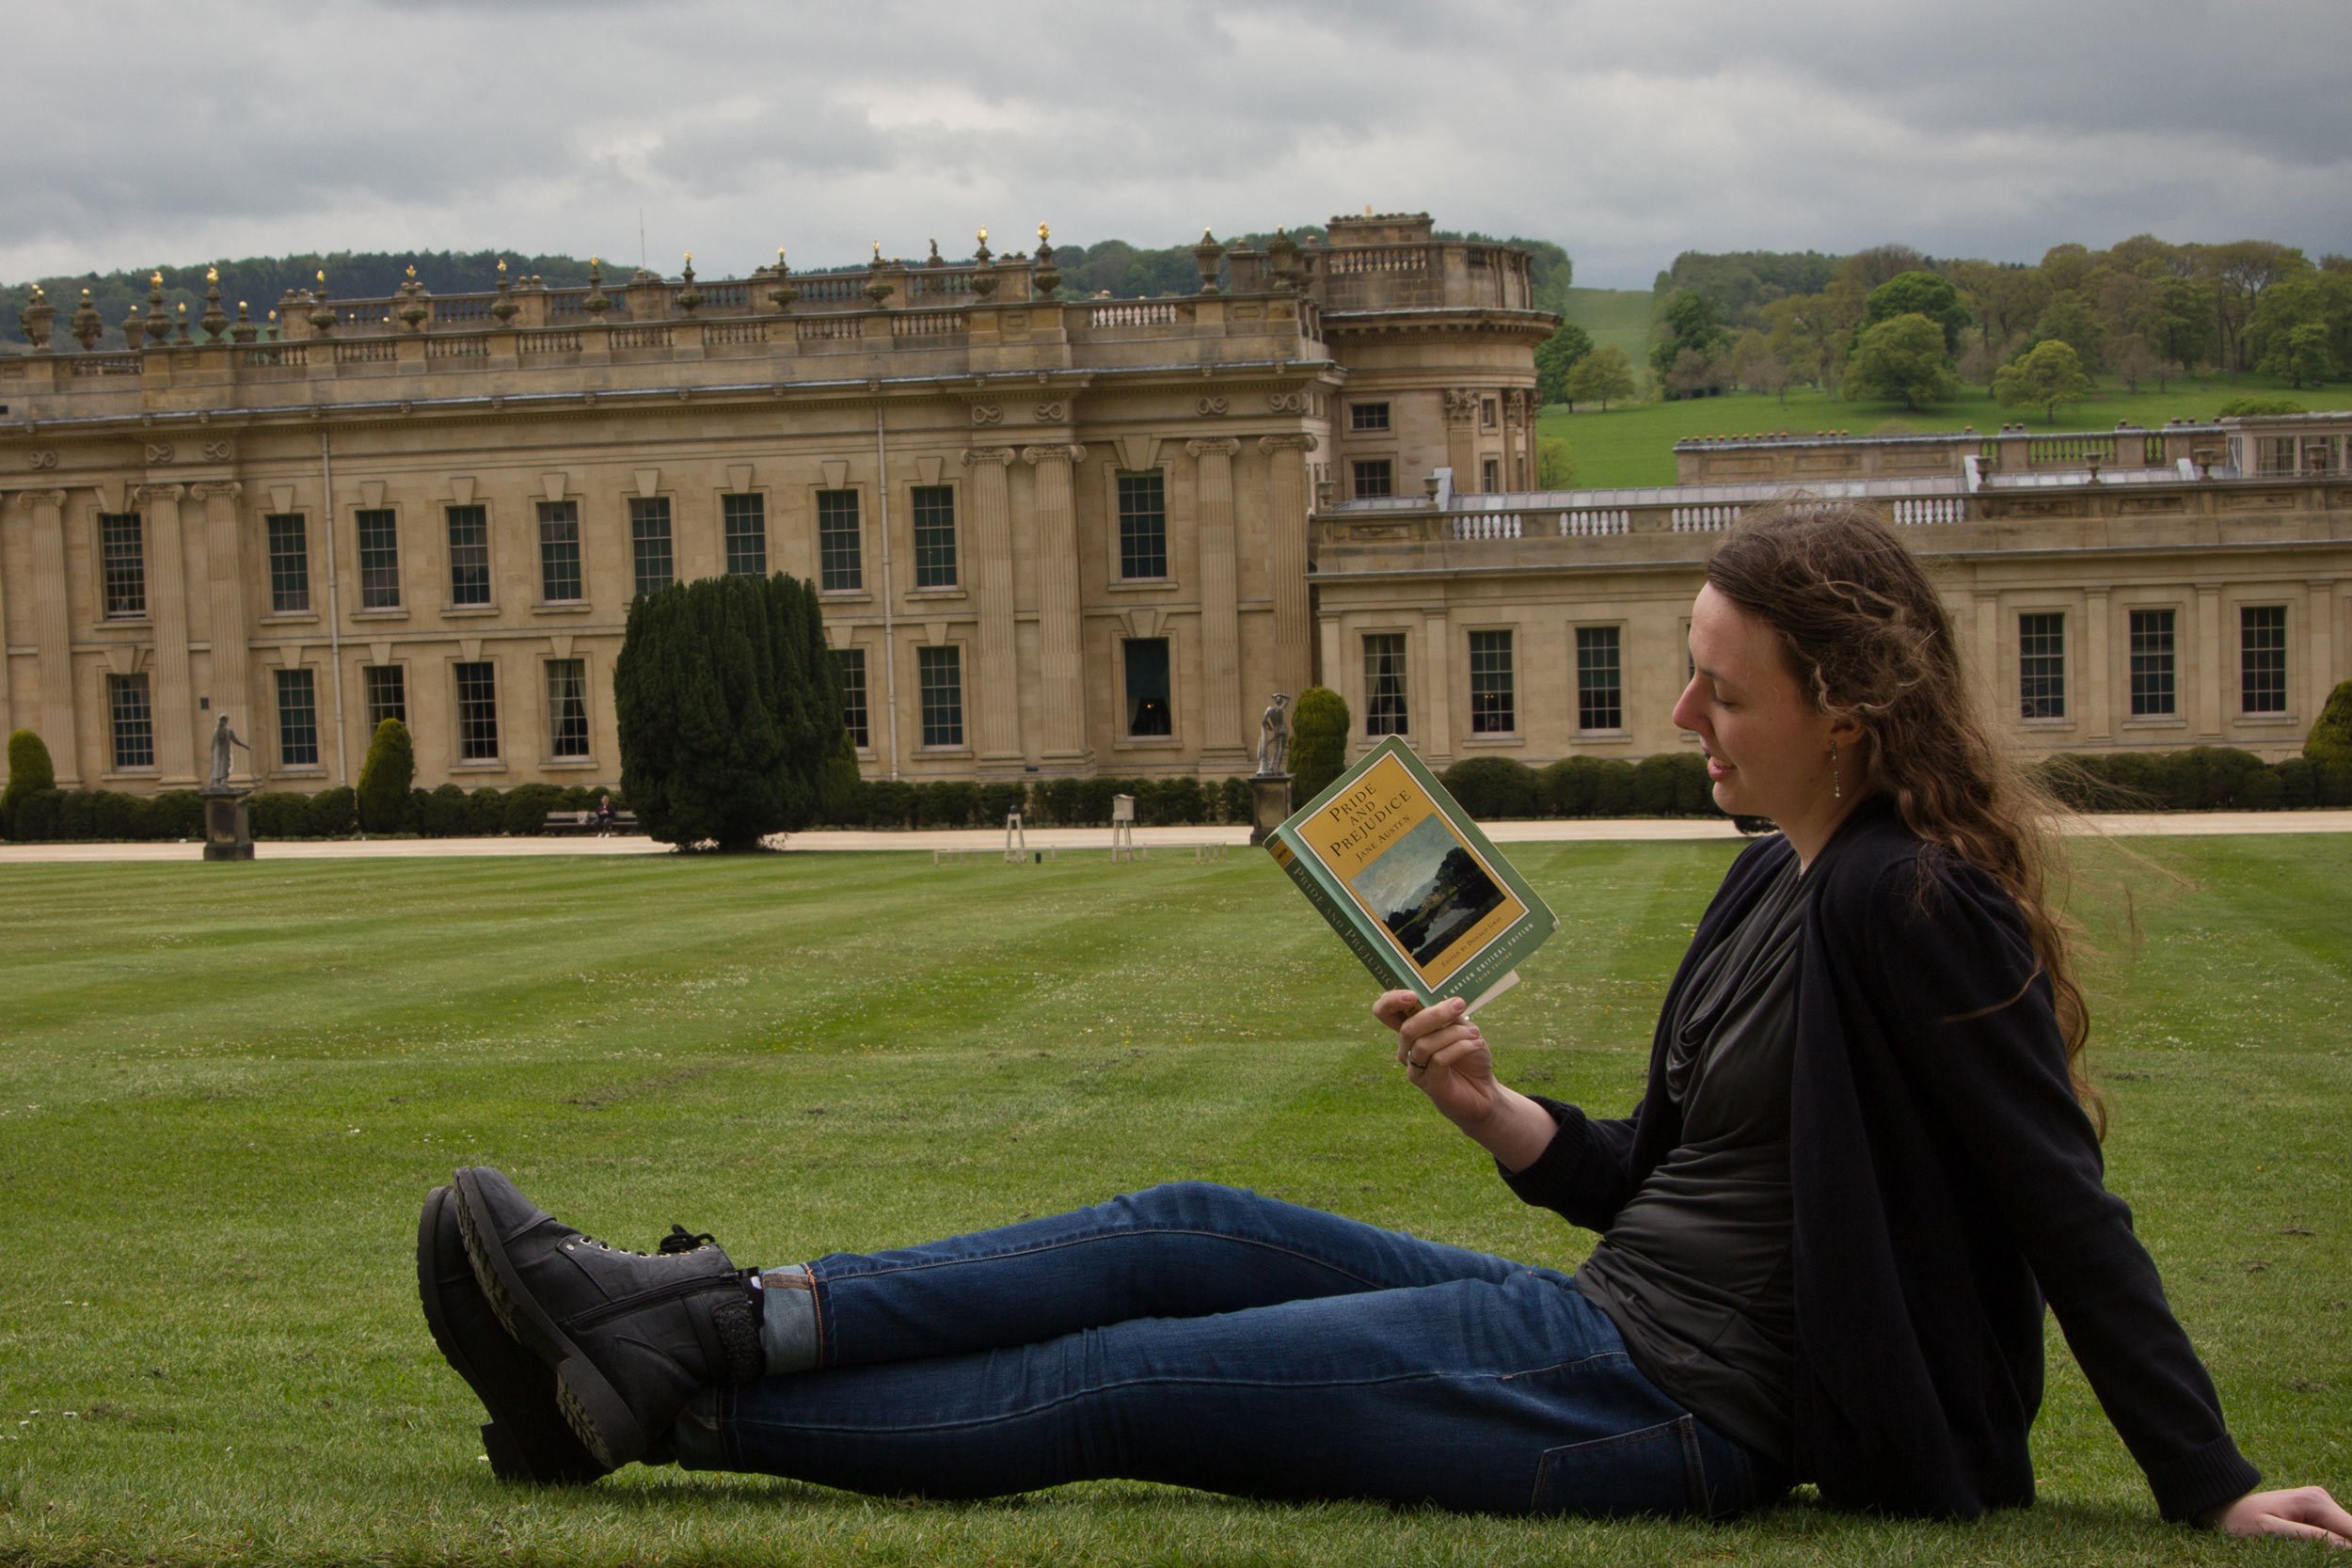 reading-pride-and-prejudice-outside-of-chatsworth-house-england